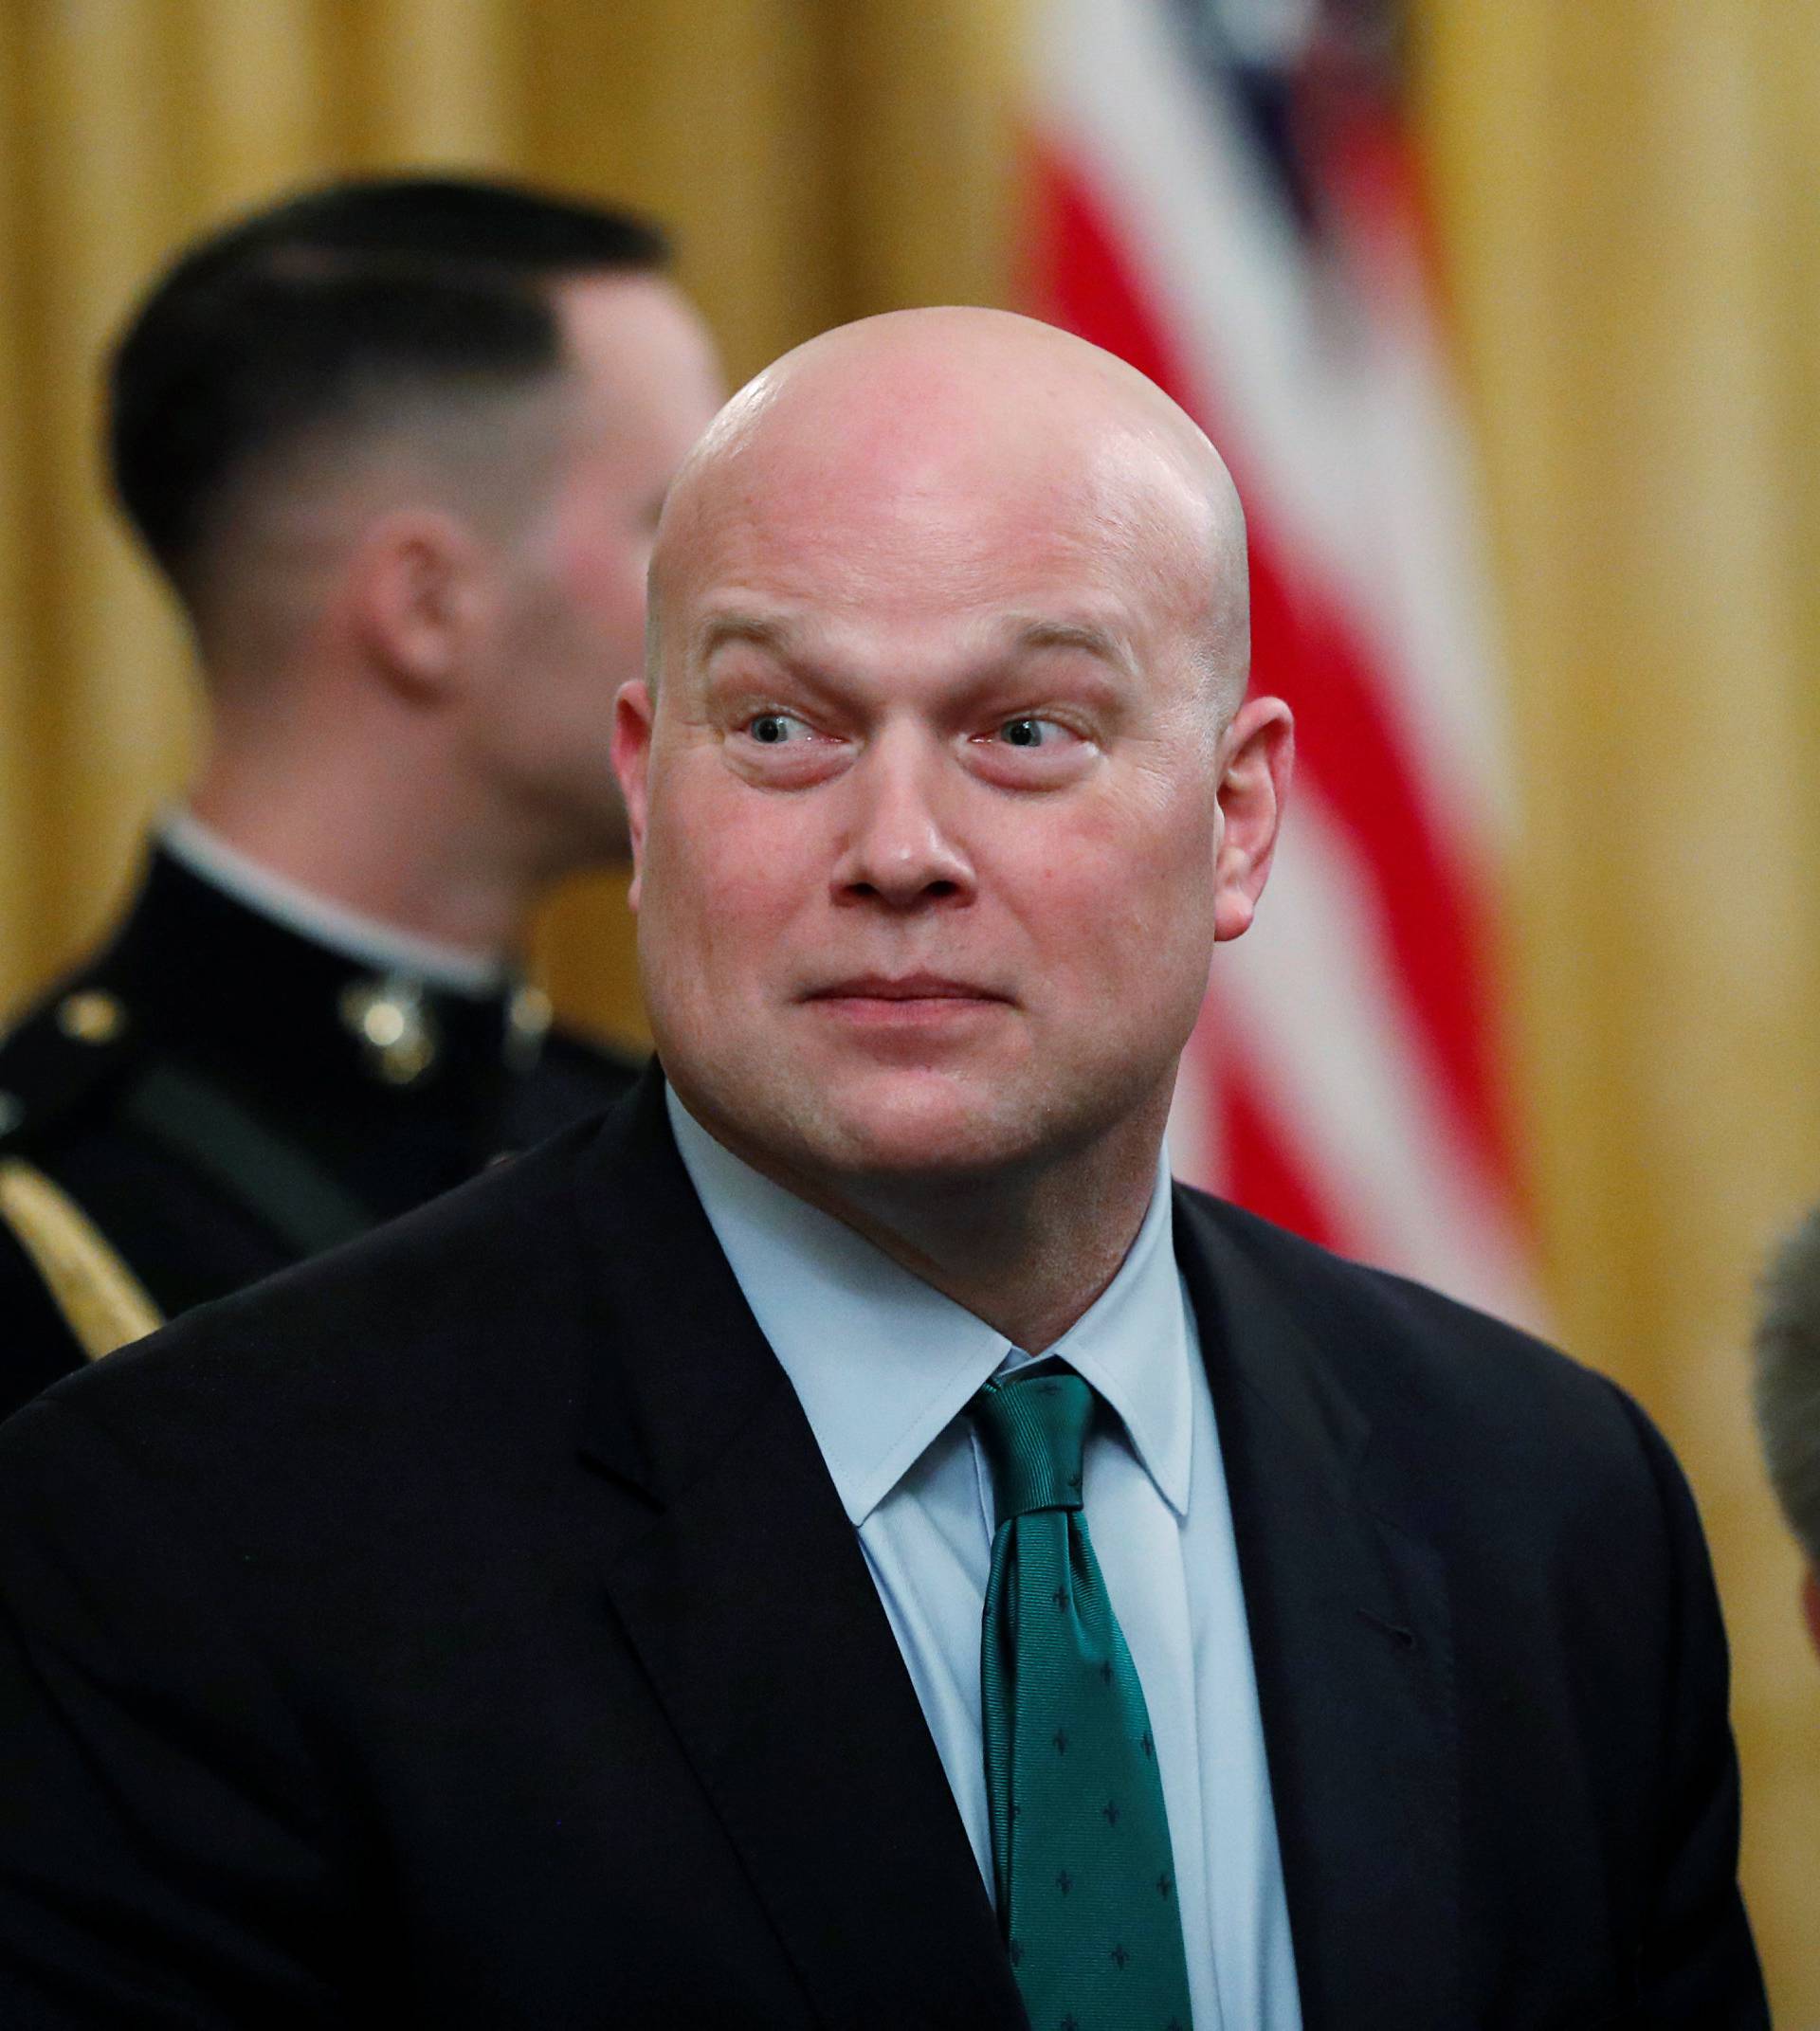 Acting U.S. Attorney General Matthew Whitaker attends 2018 Presidential Medal of Freedom ceremony at the White House in Washington